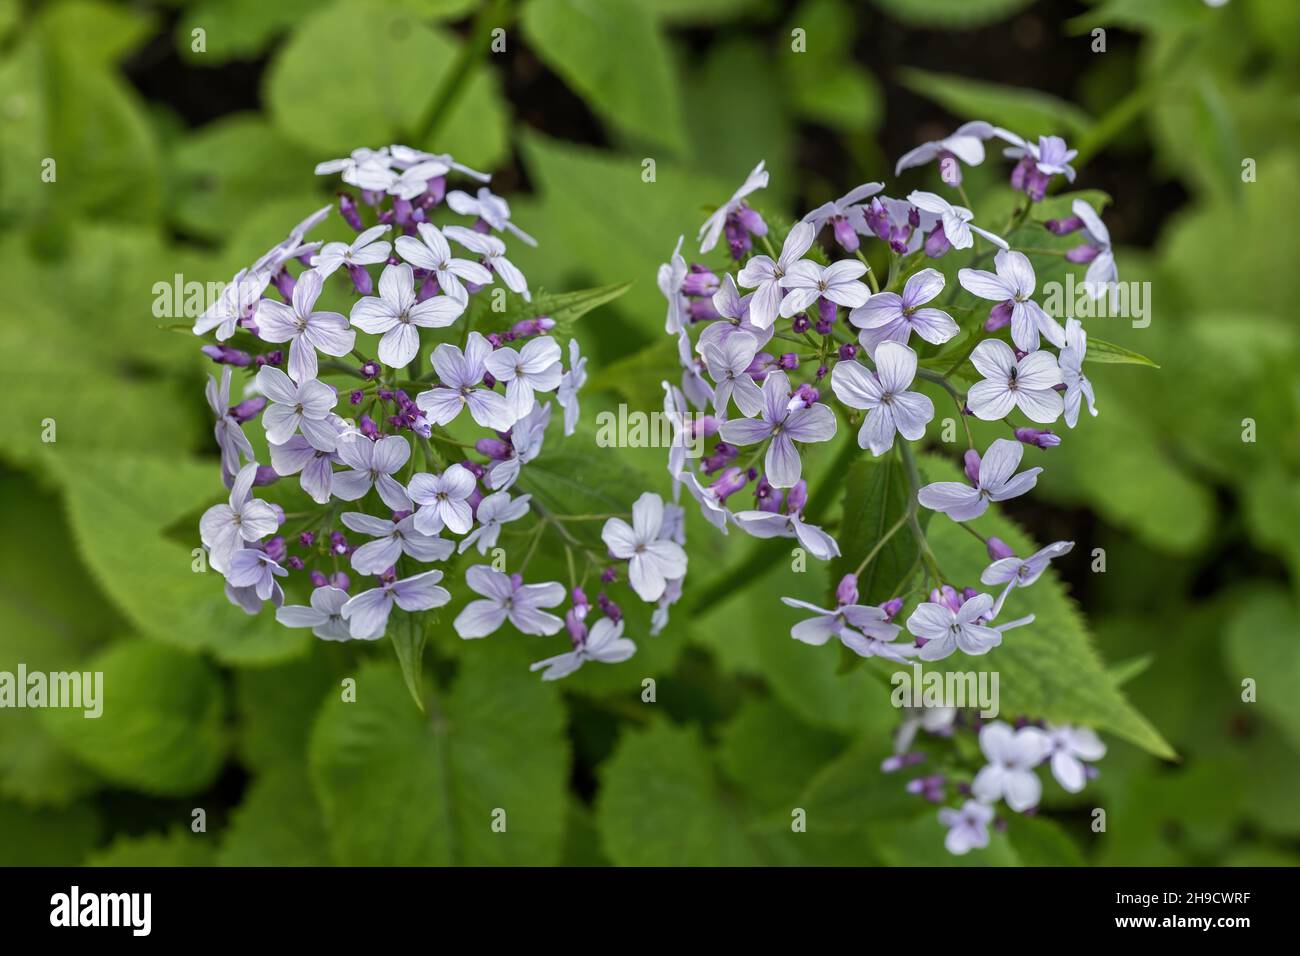 Lunaria rediviva L. blooming flowers, perennial honesty in the family: Brassicaceae. Stock Photo